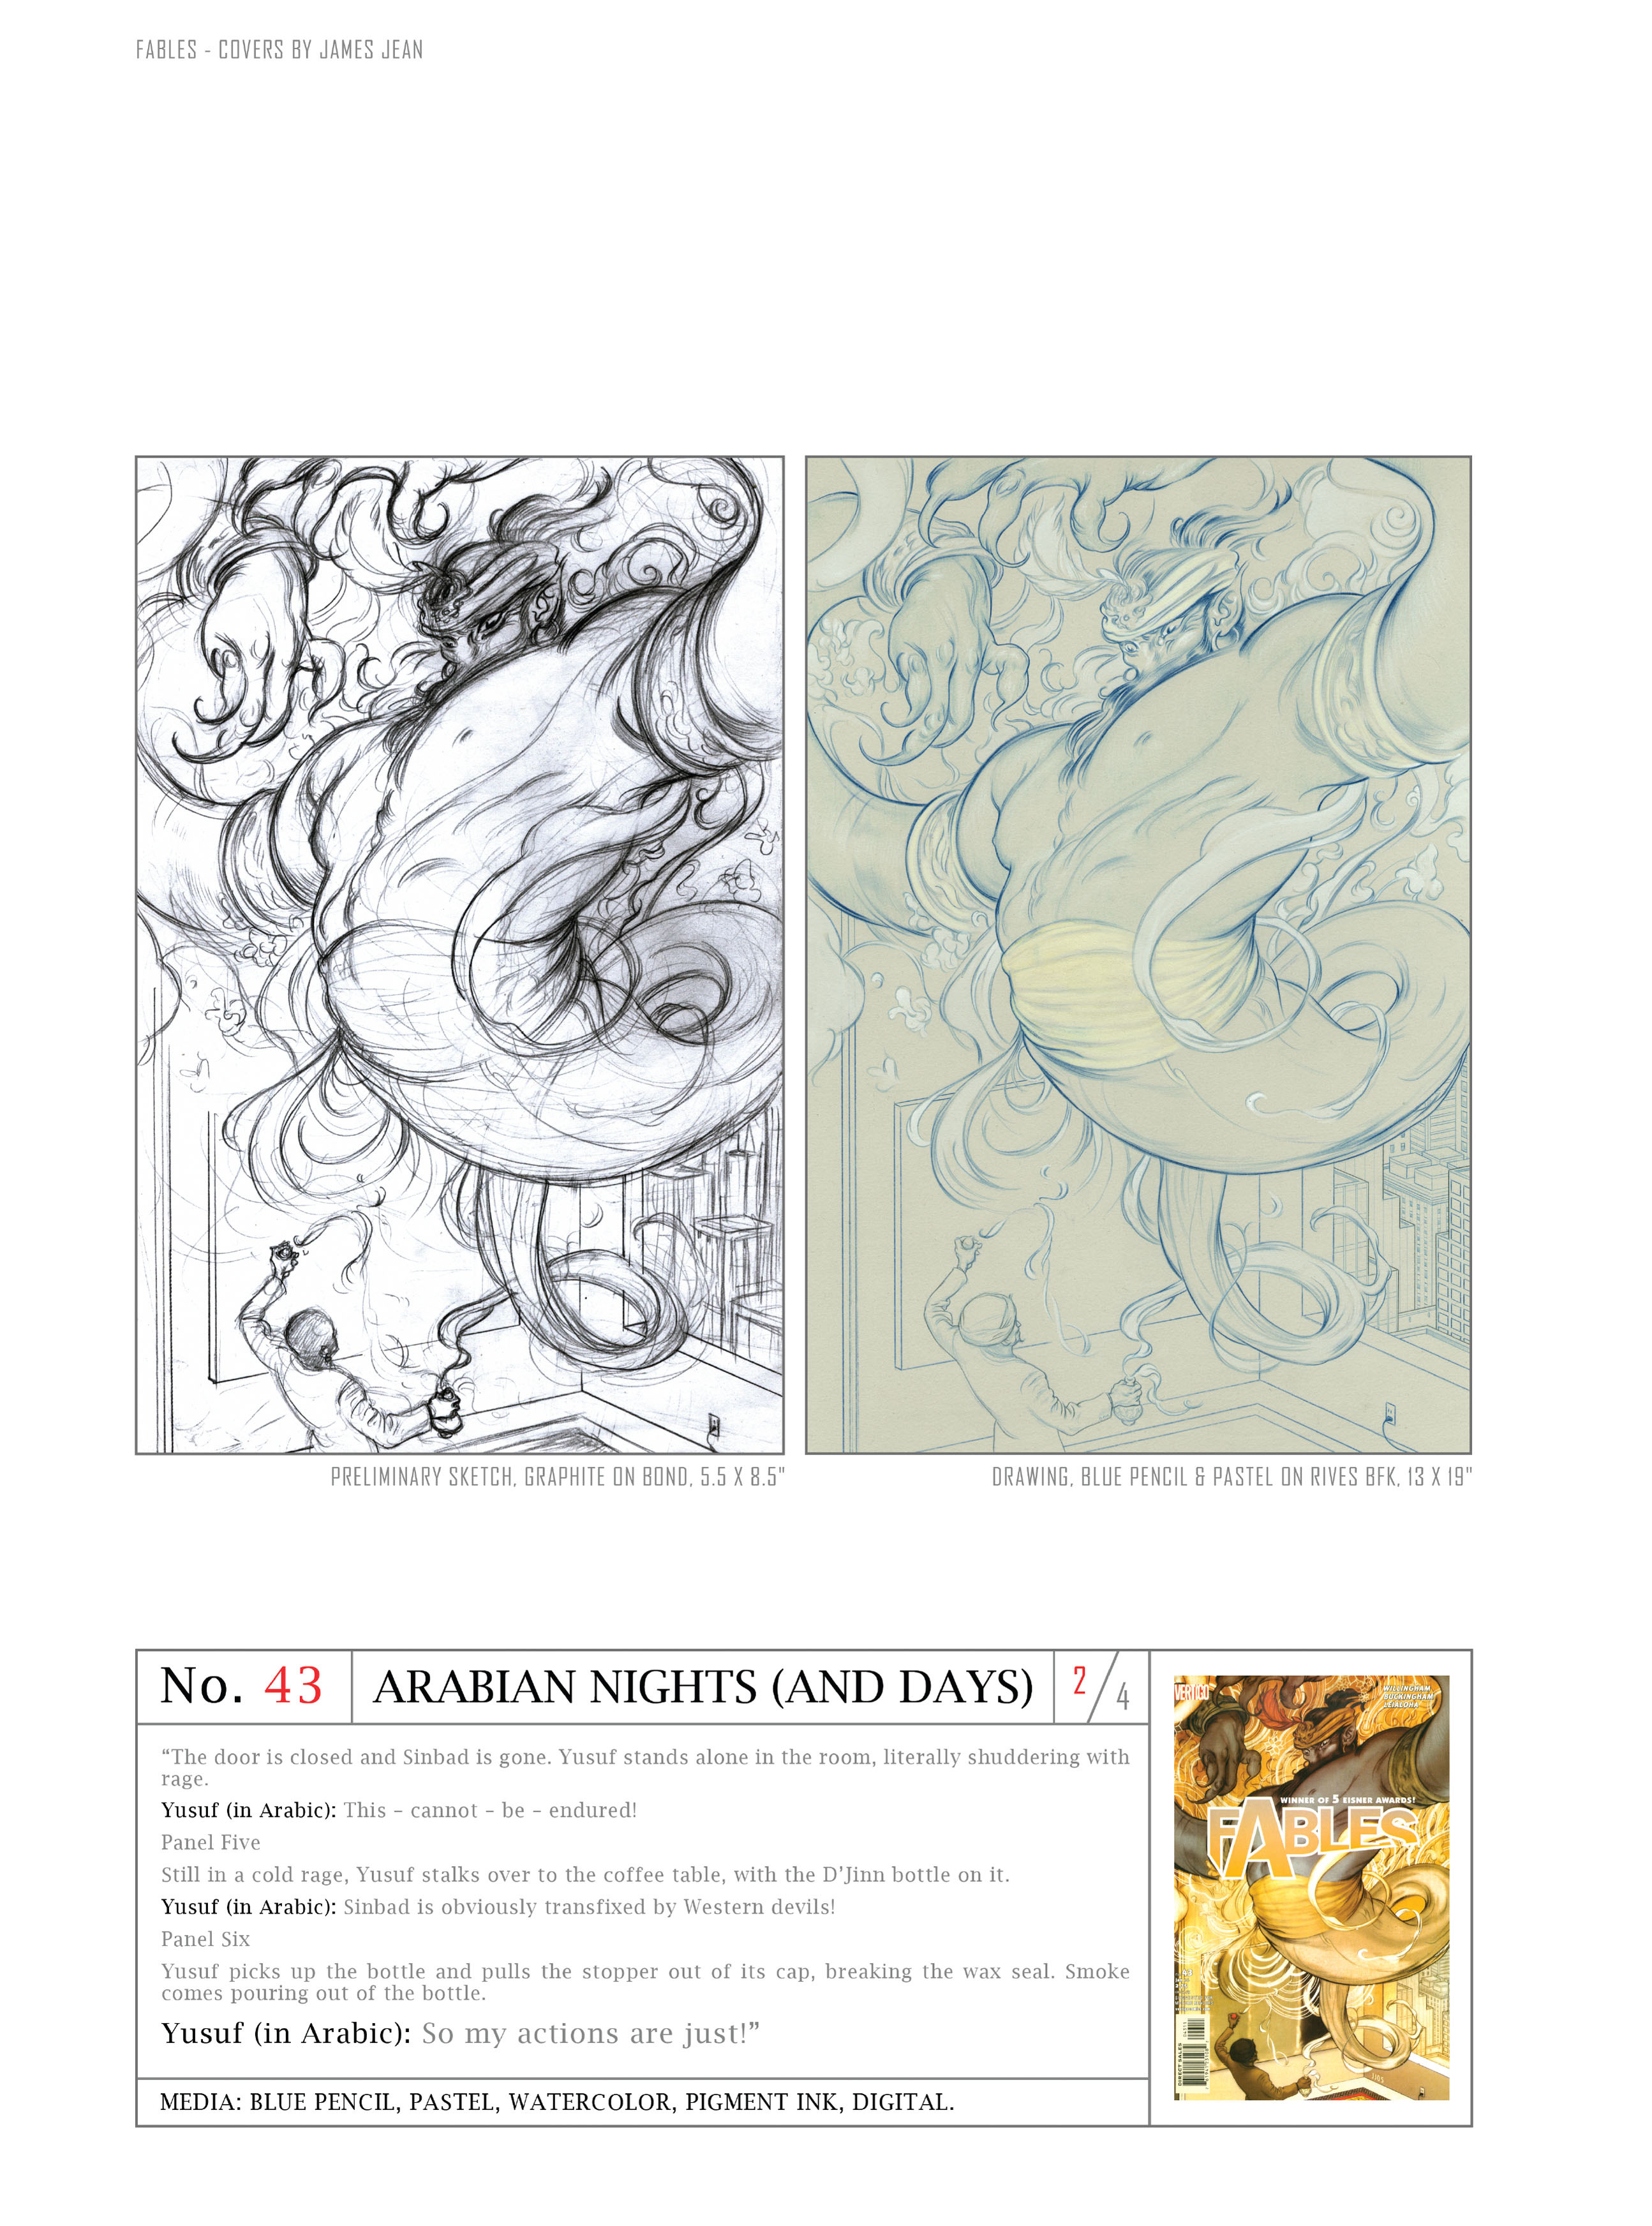 Read online Fables: Covers by James Jean comic -  Issue # TPB (Part 2) - 10